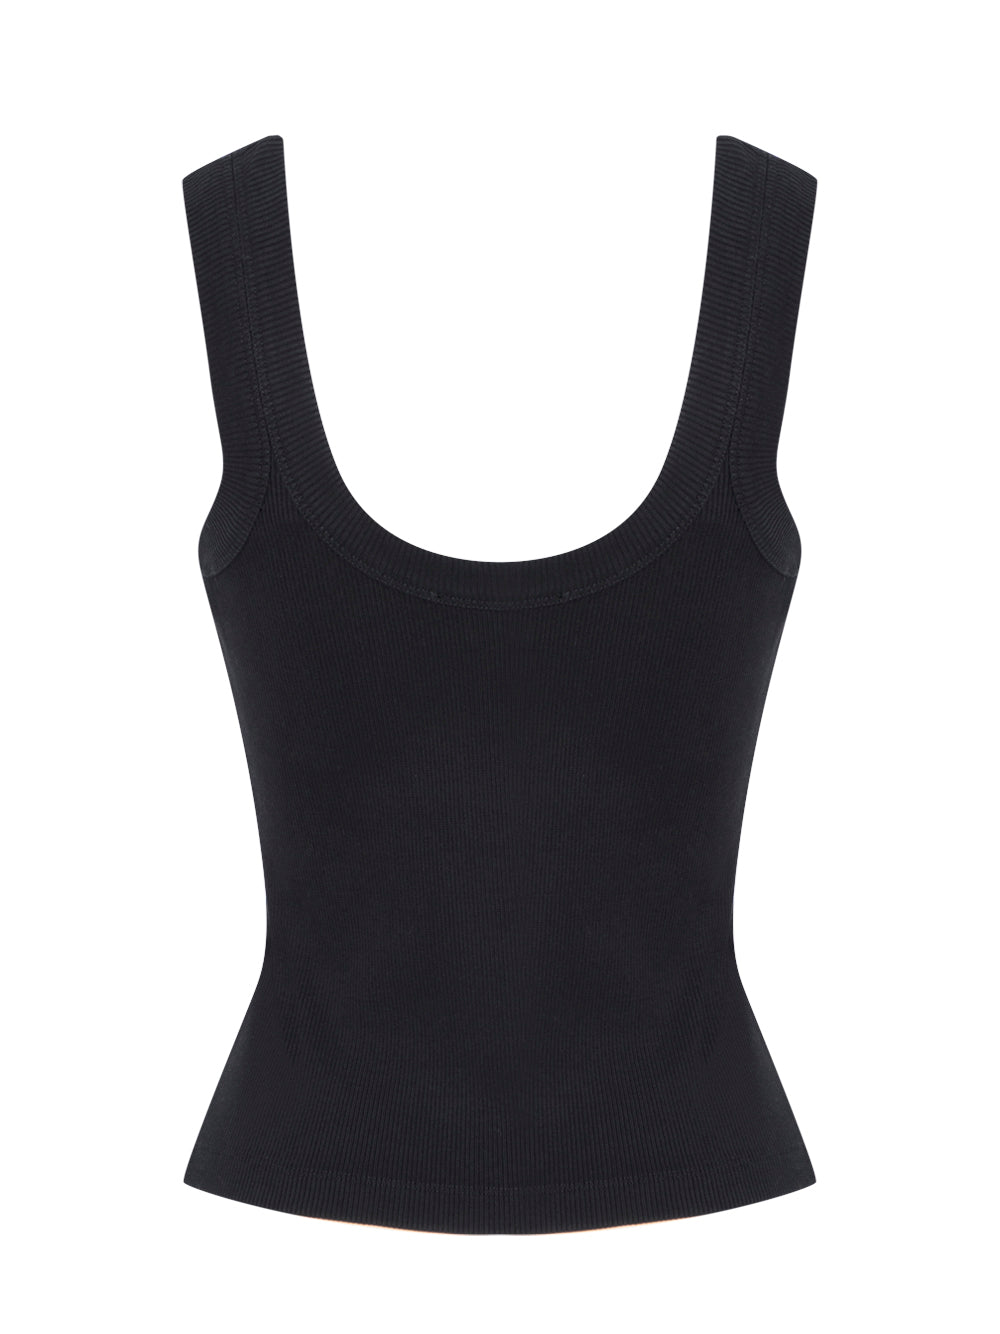 Tank Top With Embossed Logo (Black)